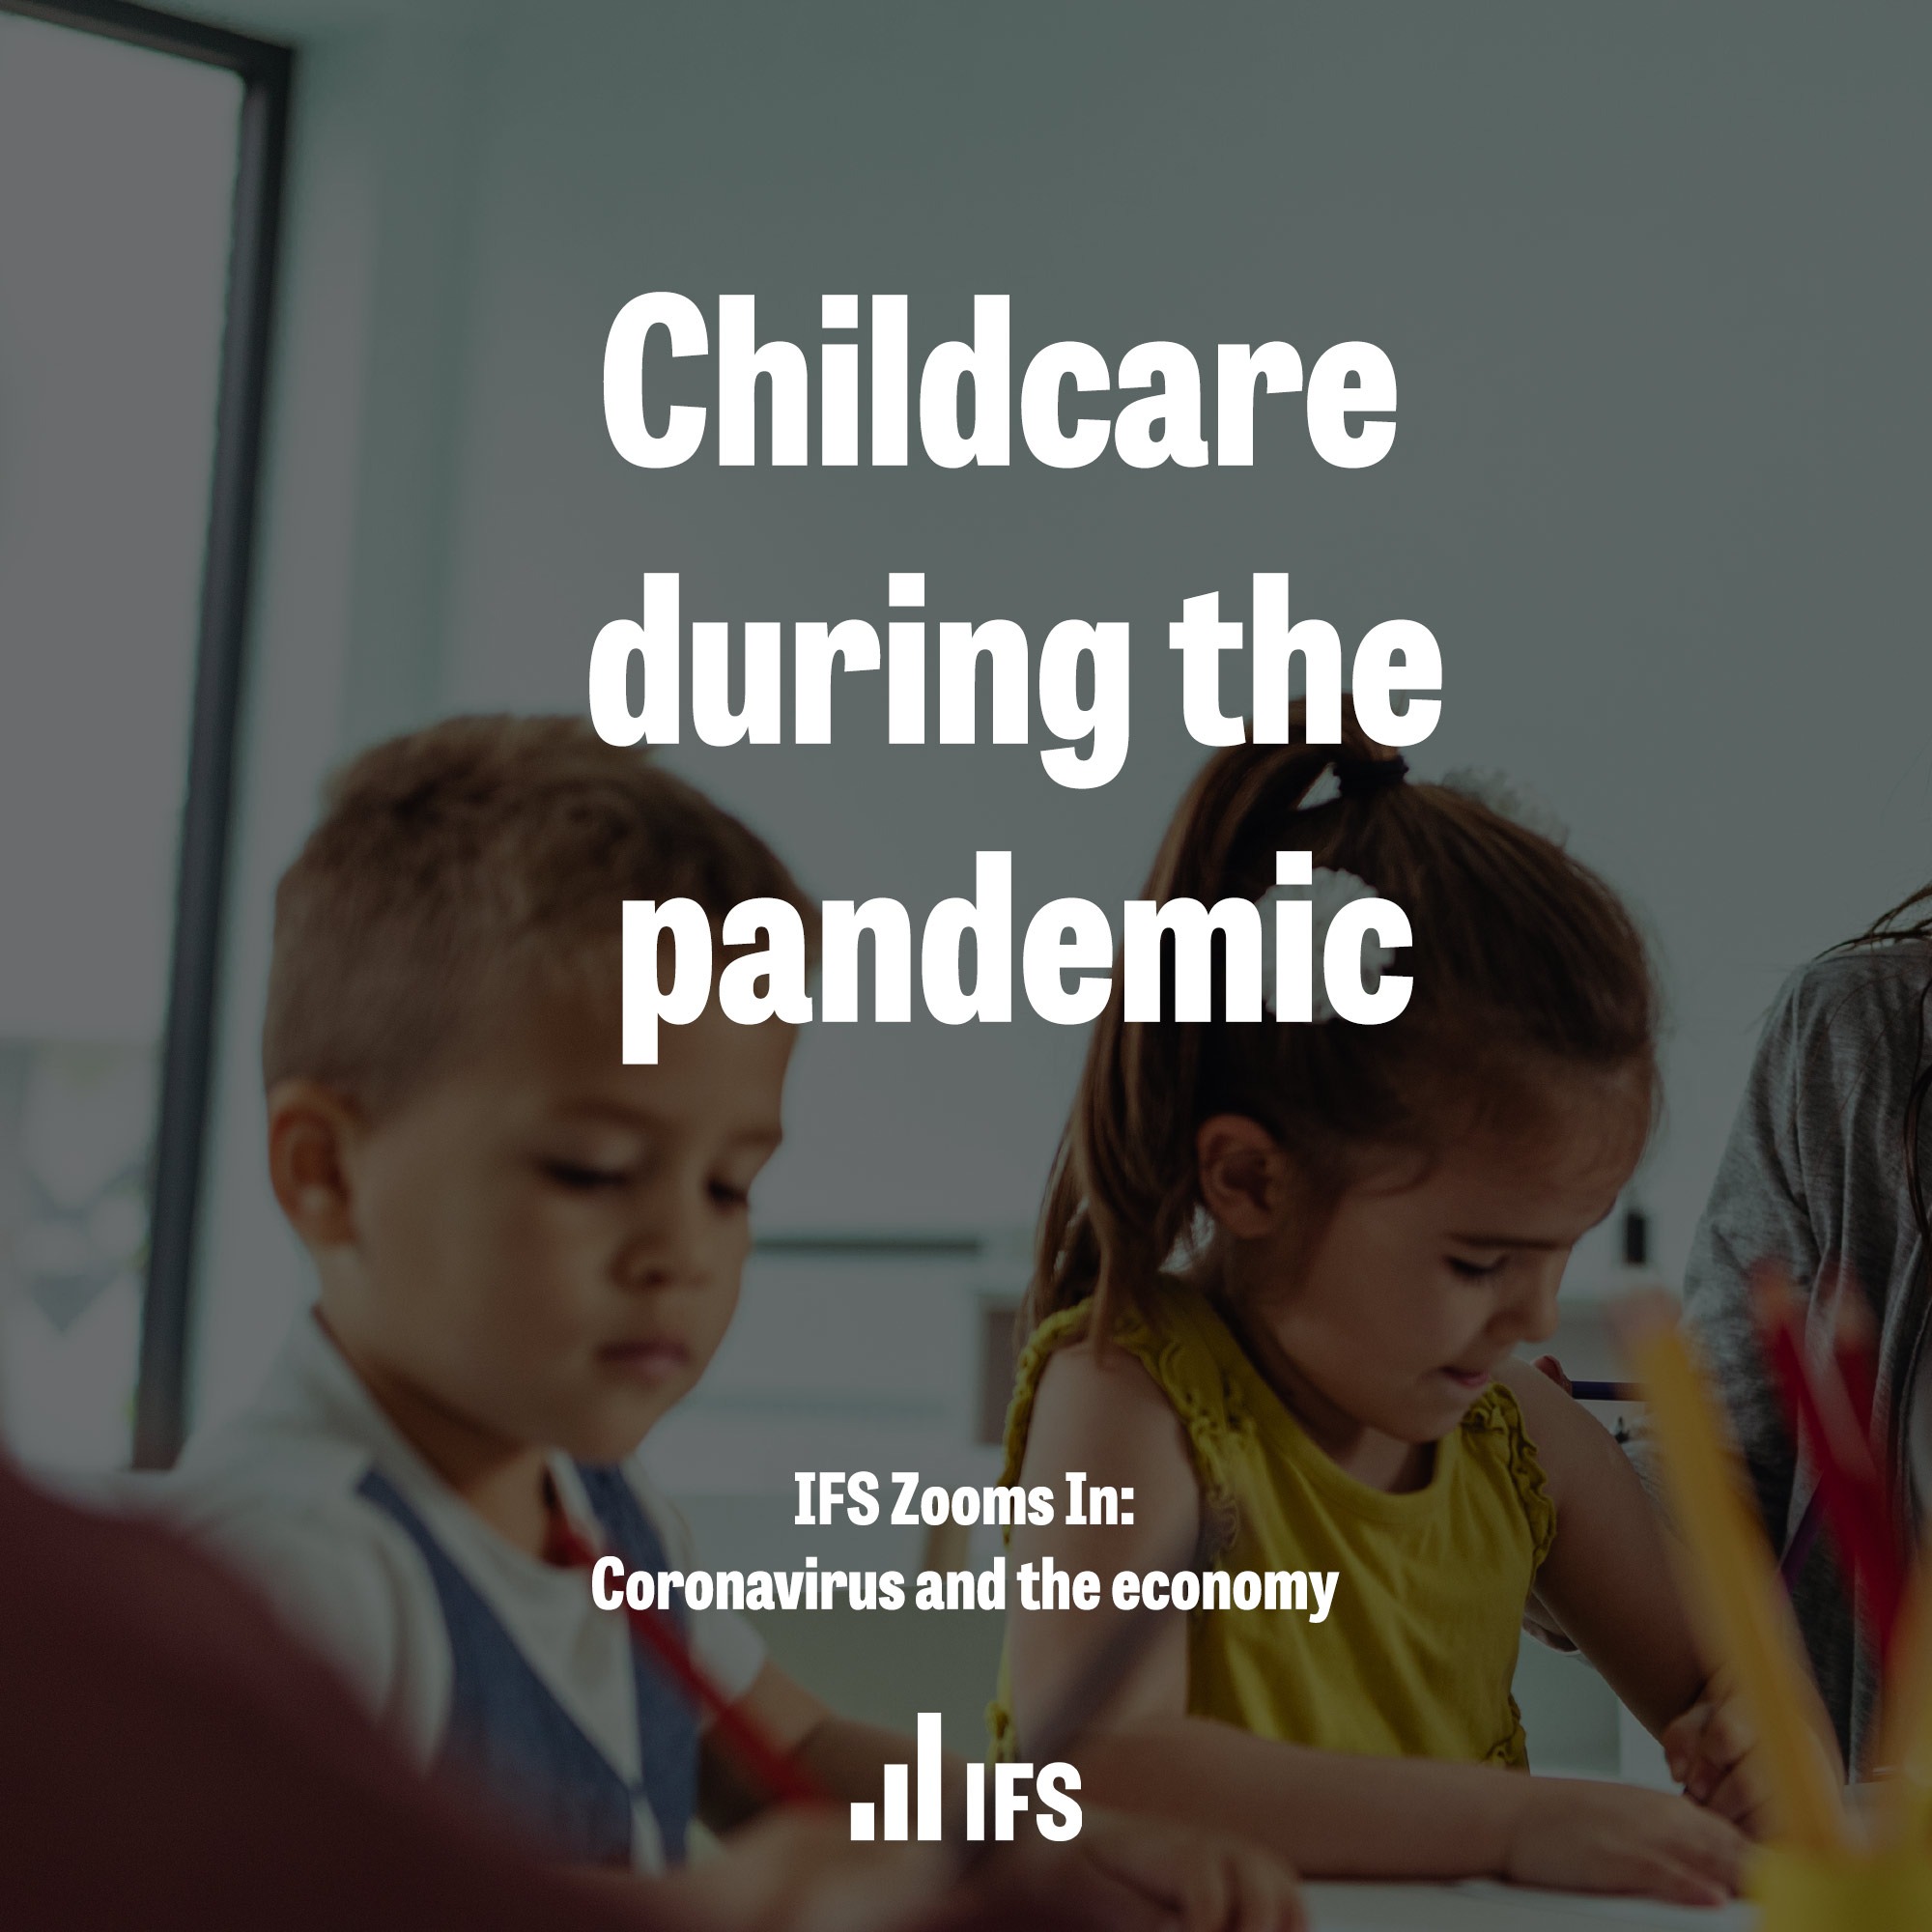 Childcare during the pandemic